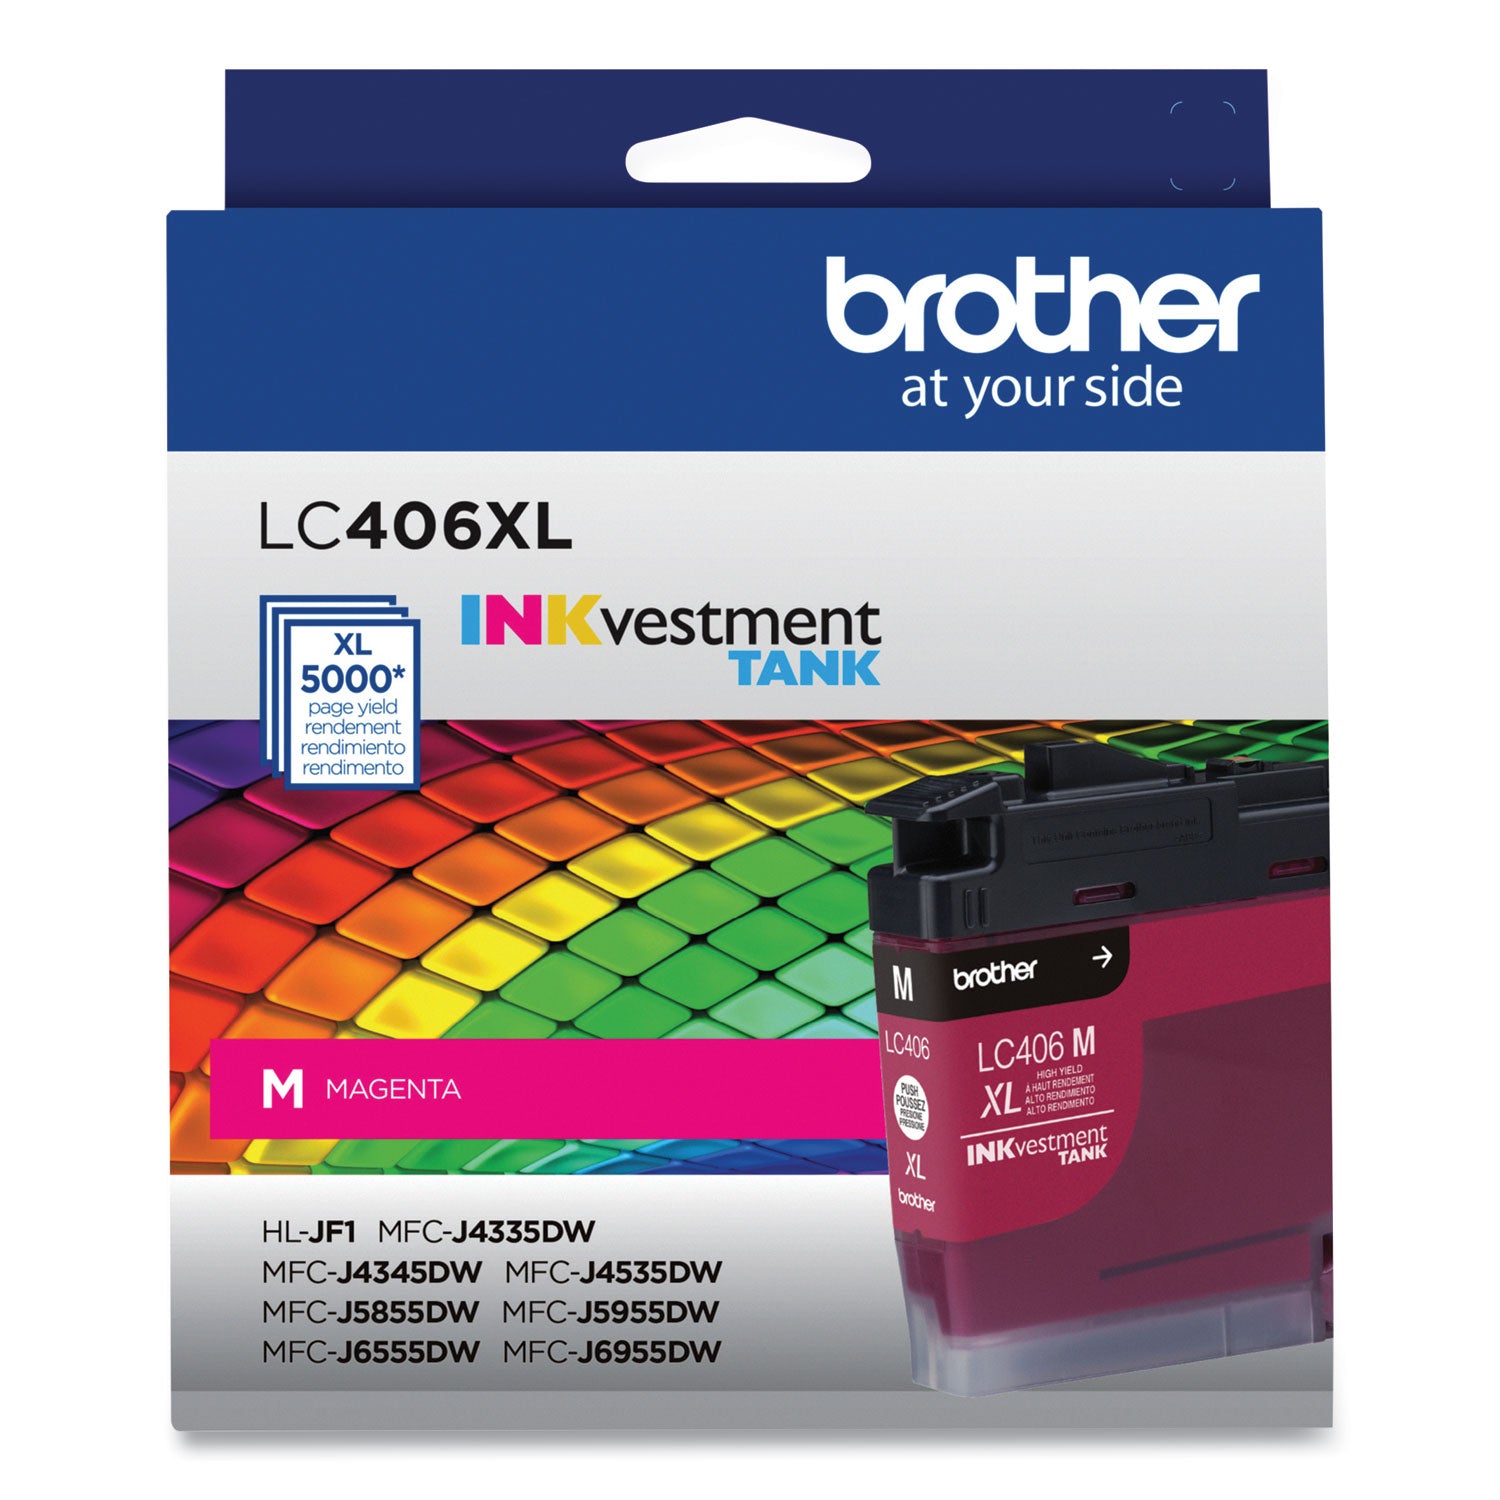 lc406xlms-inkvestment-high-yield-ink-5000-page-yield-magenta_brtlc406xlms - 1